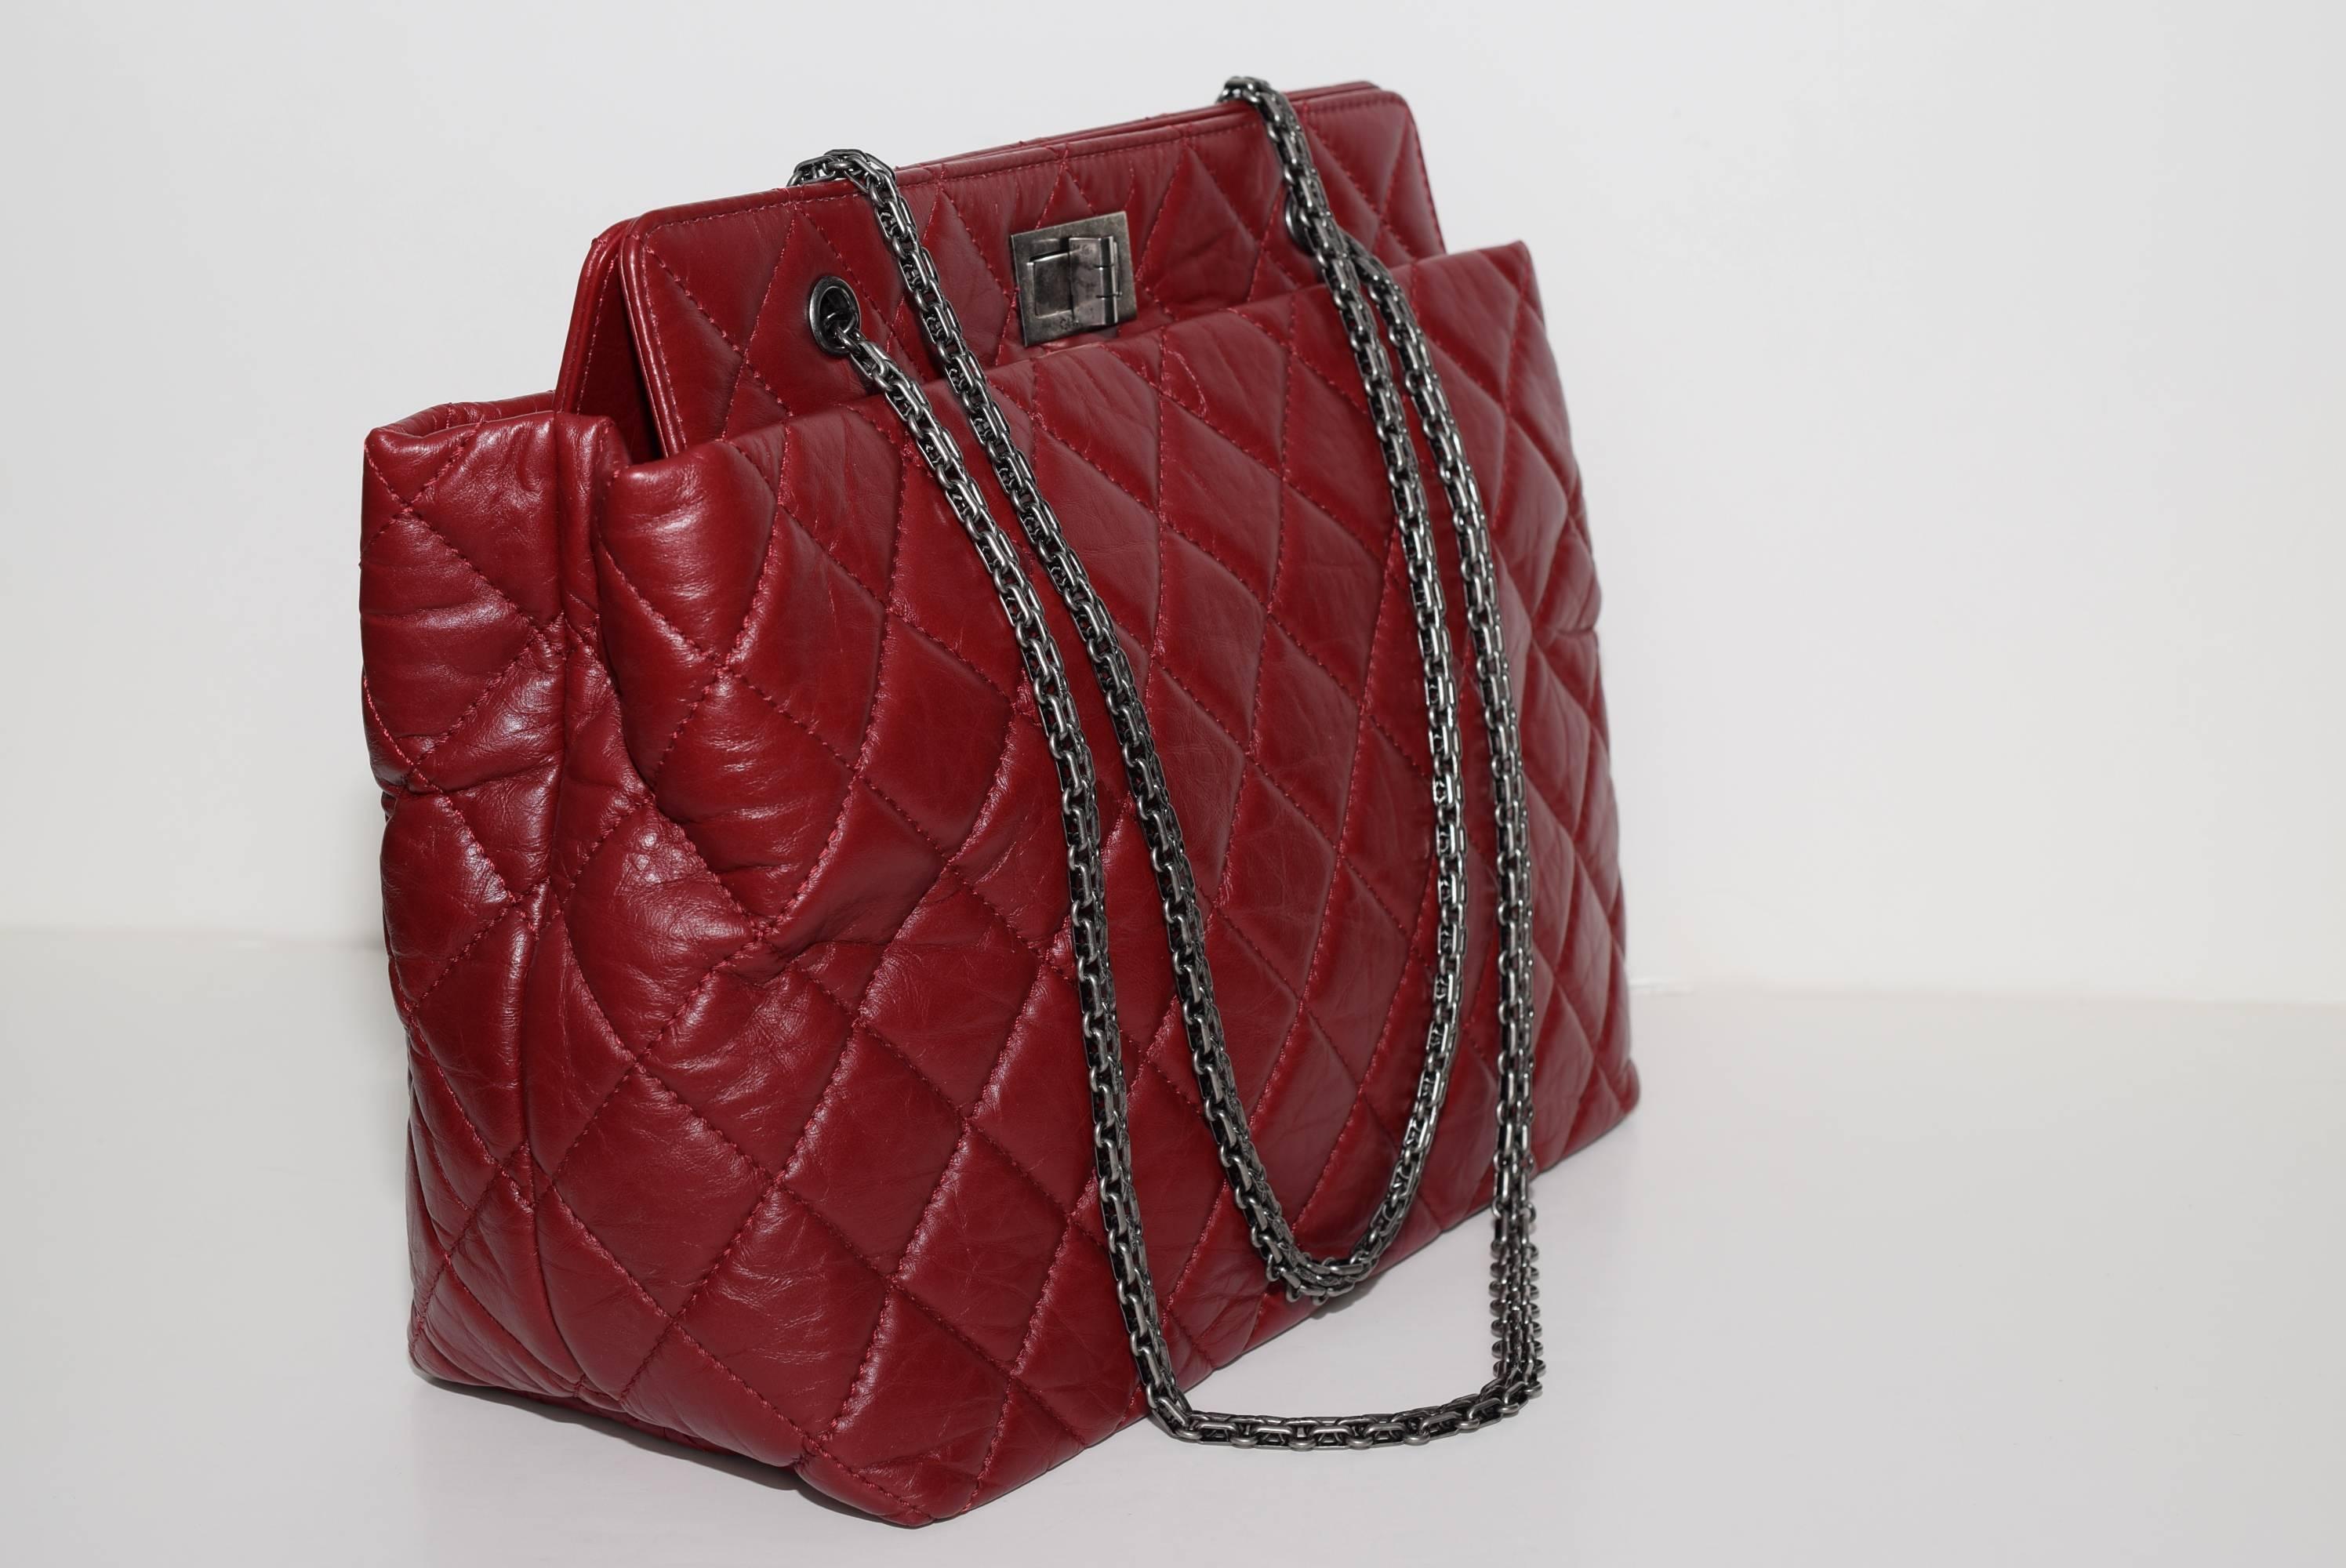 Brown Chanel Grand Shopping Medium Tote Red w/ aged Leather bag.